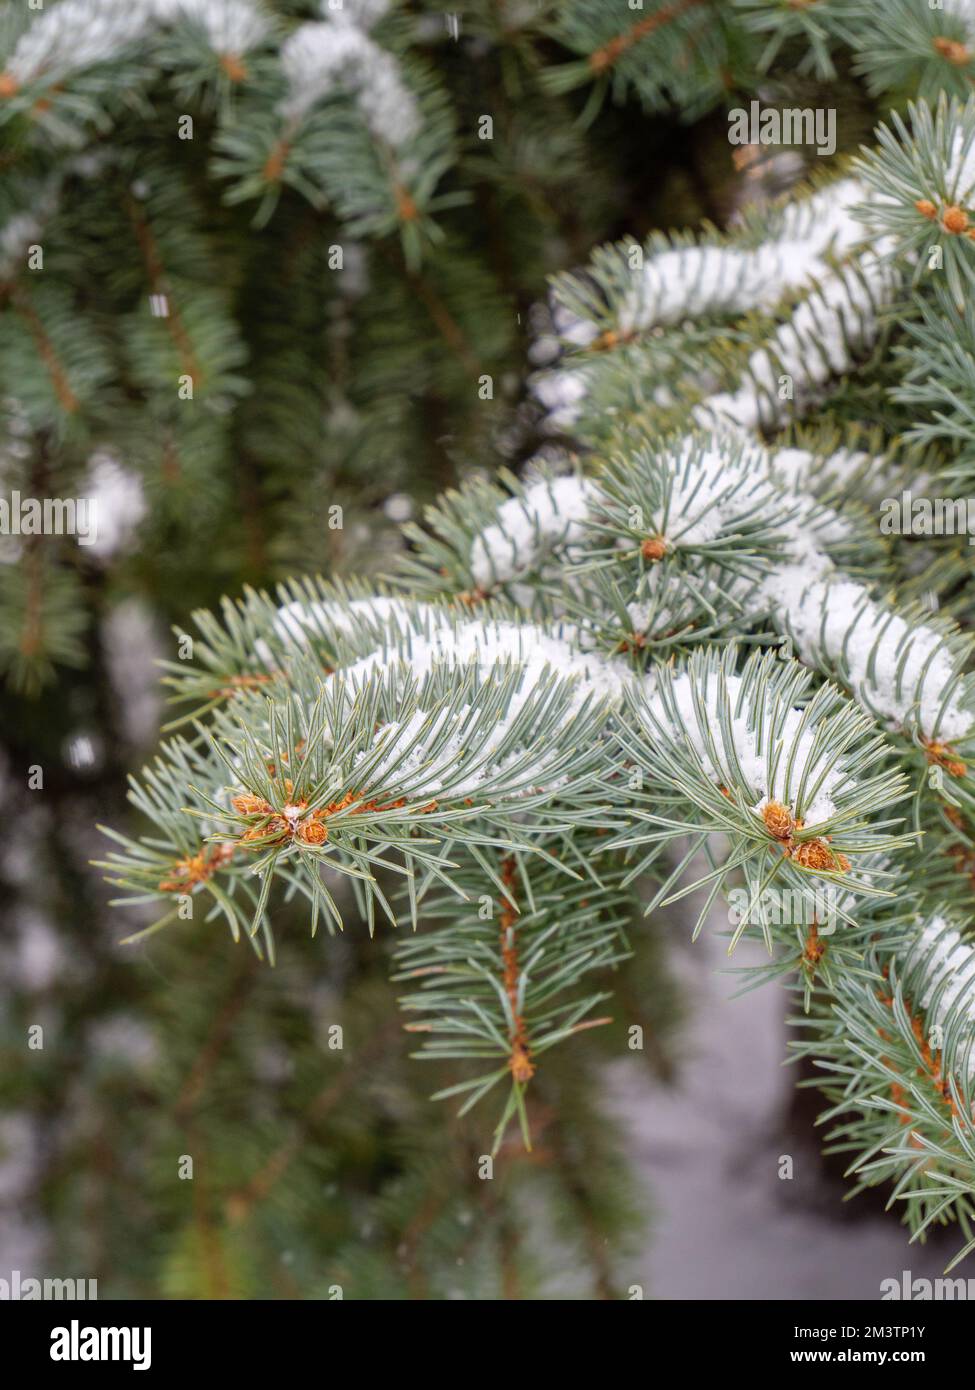 Blue spruce tree branch and needles with fresh snow. Stock Photo